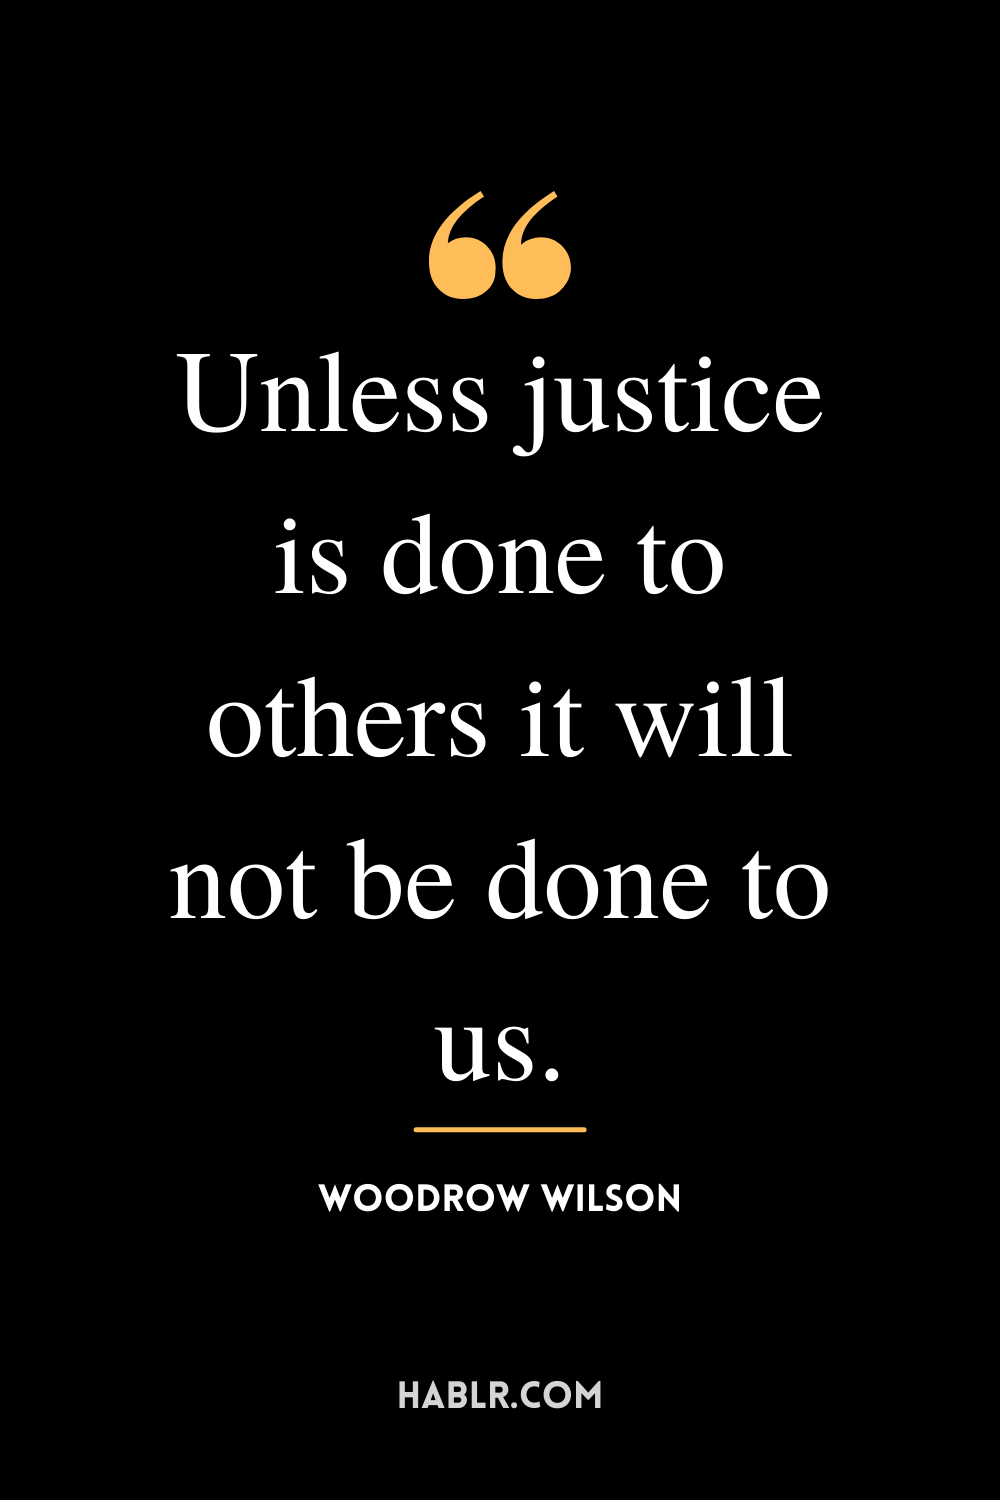 “Unless justice is done to others it will not be done to us.” -Woodrow Wilson